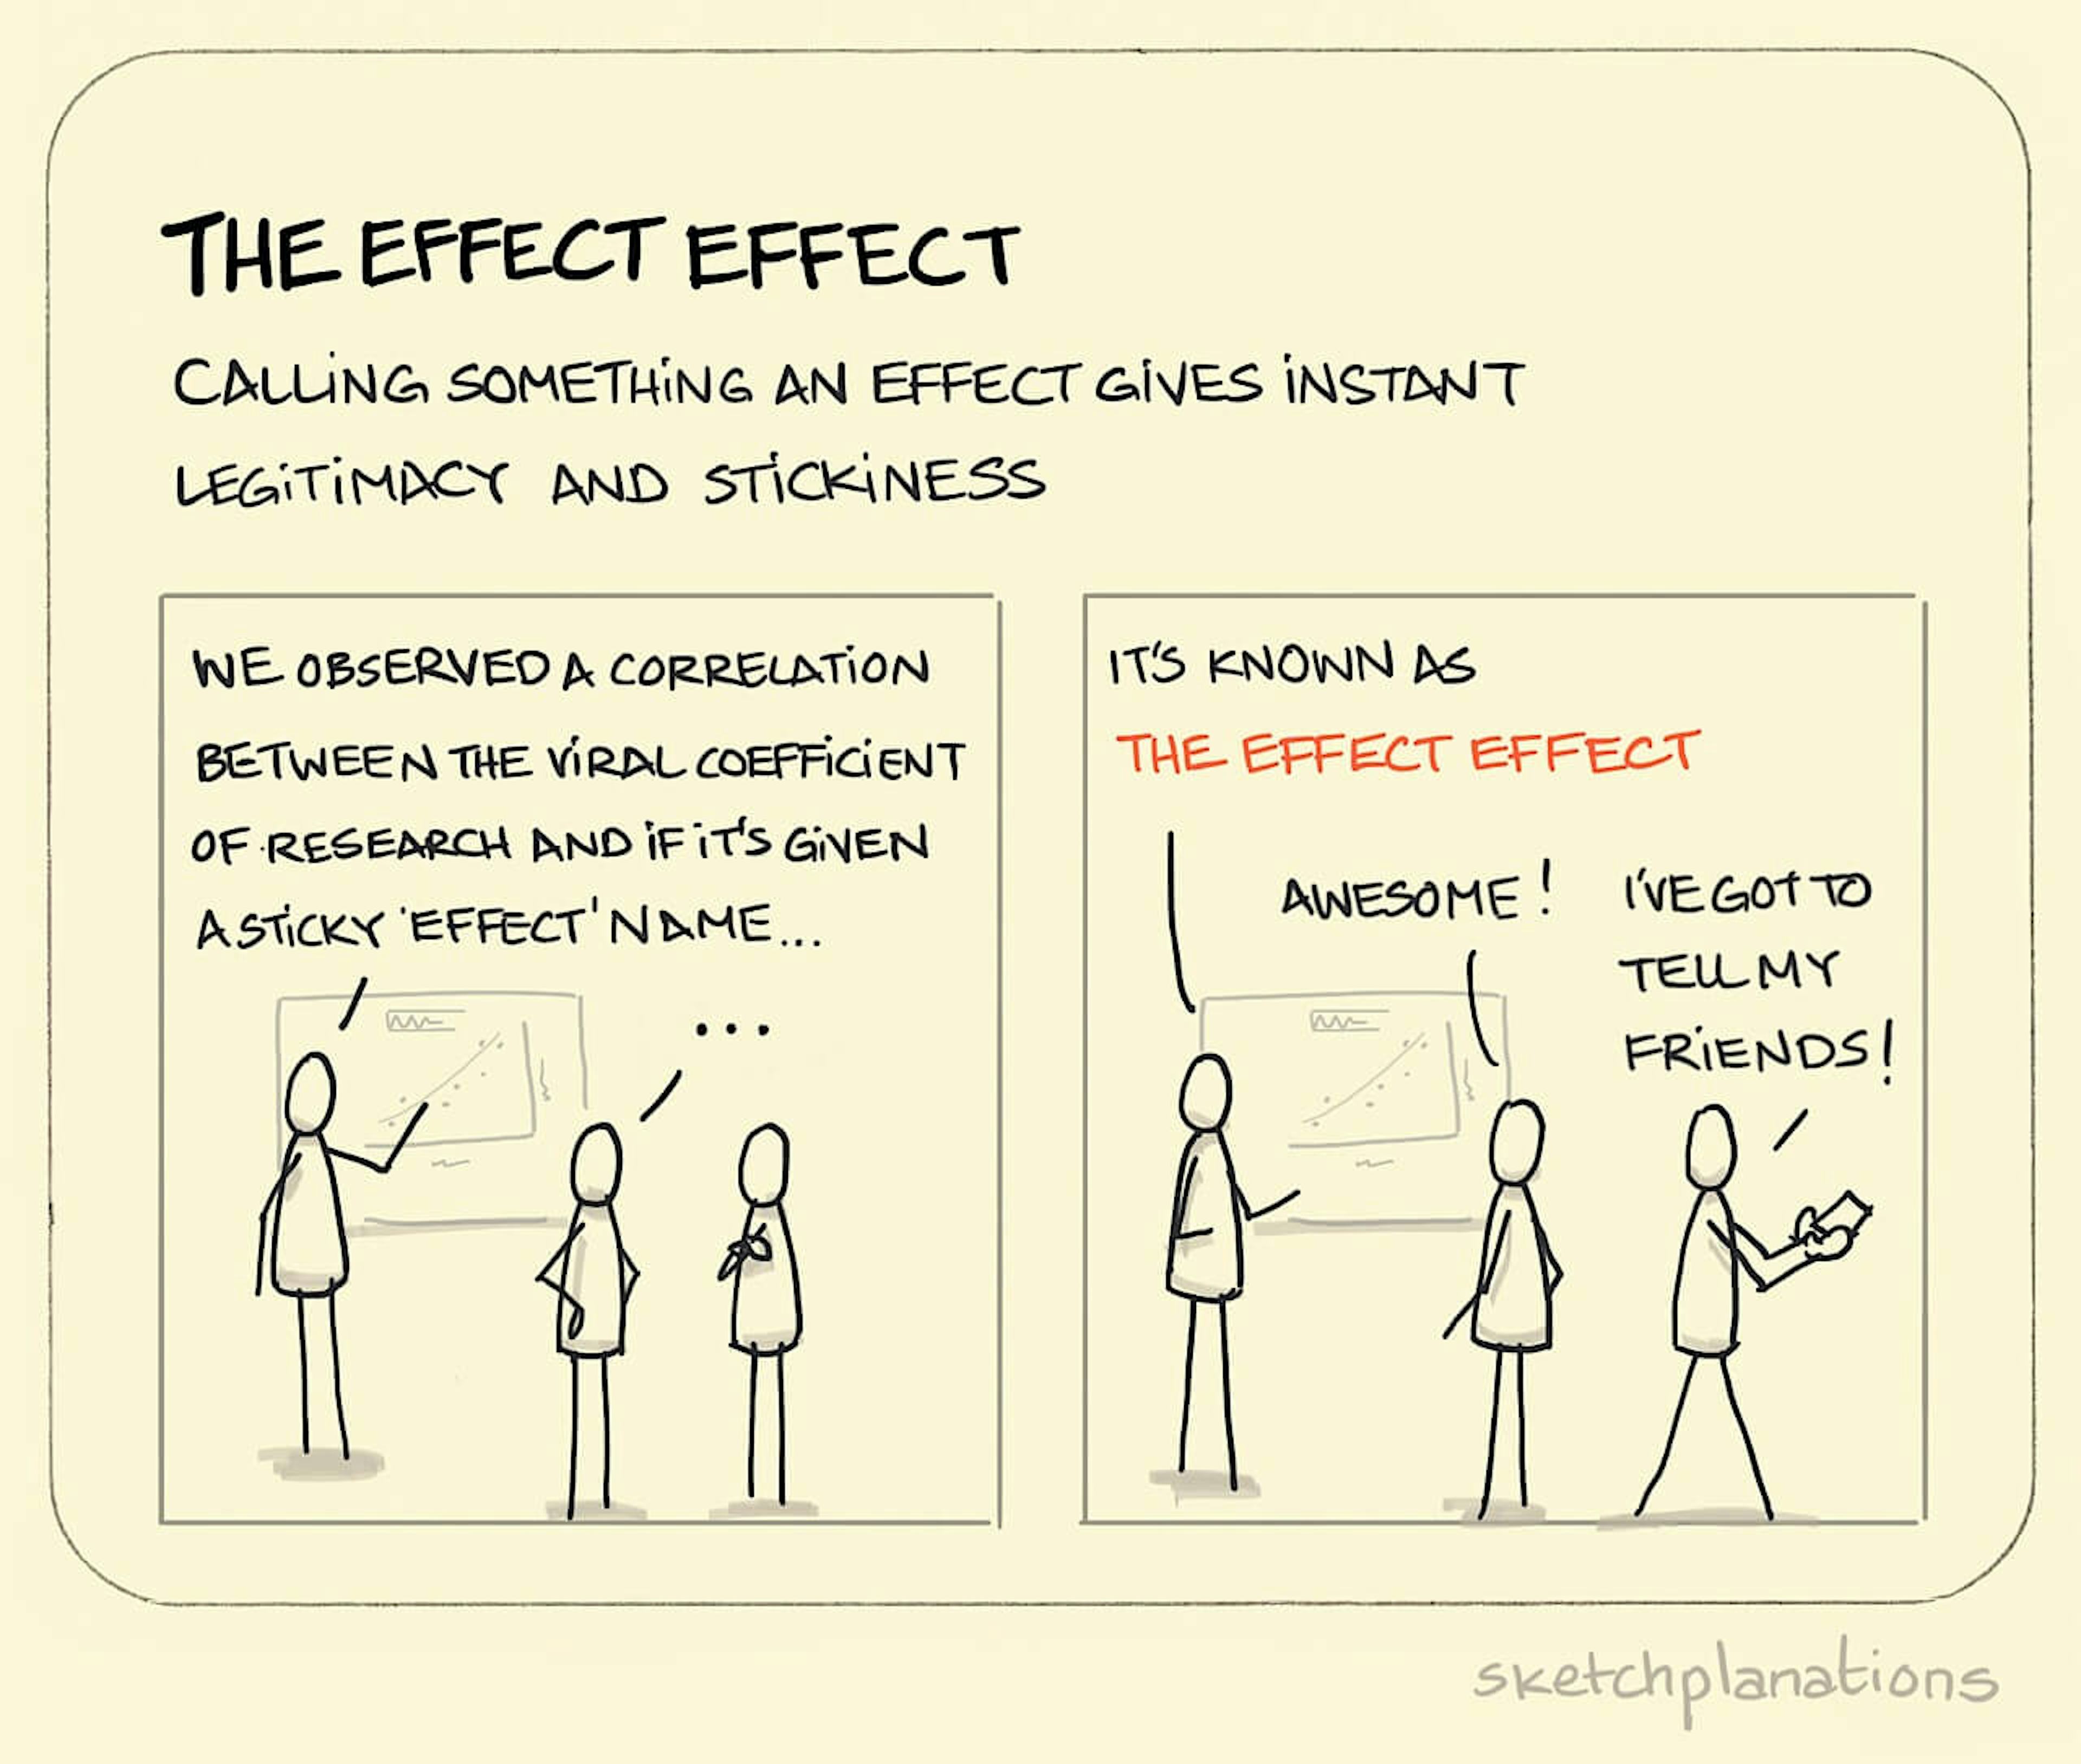 The Effect Effect illustration: two colleagues are left in no doubt as to the veracity of research presented to them because it has been labelled as an "effect". Indeed, one heads straight off to tell their friends about it. 